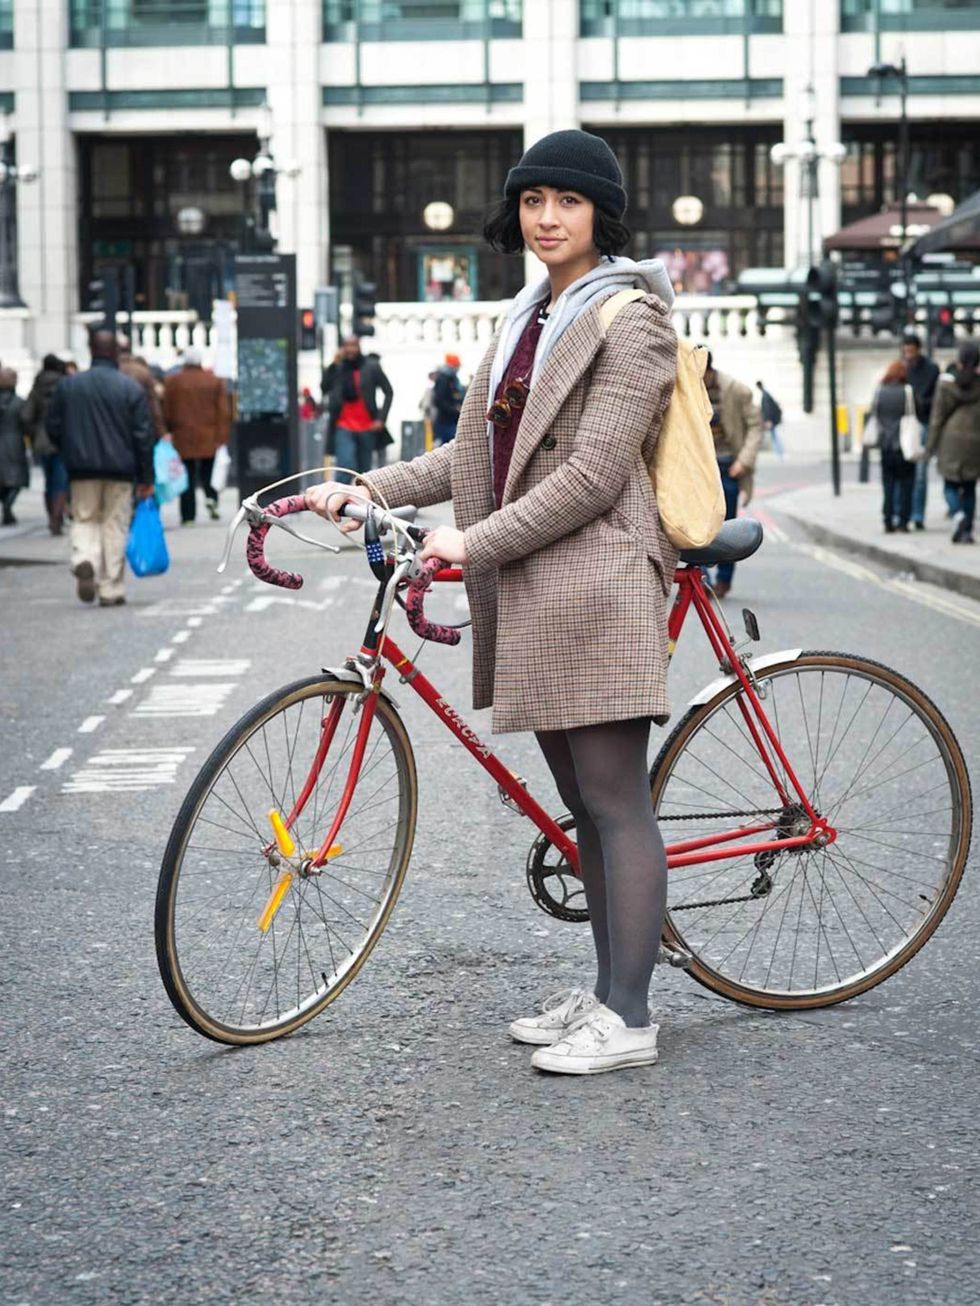 <p>Ella, 22, Creative. Europa bike, Zara coat and shorts, American Apparel hoody, Urban Outfitters jumper, customised Converse trainers, charity shop hat and glasses.</p><p>Photo by Stephanie Sian Smith</p>